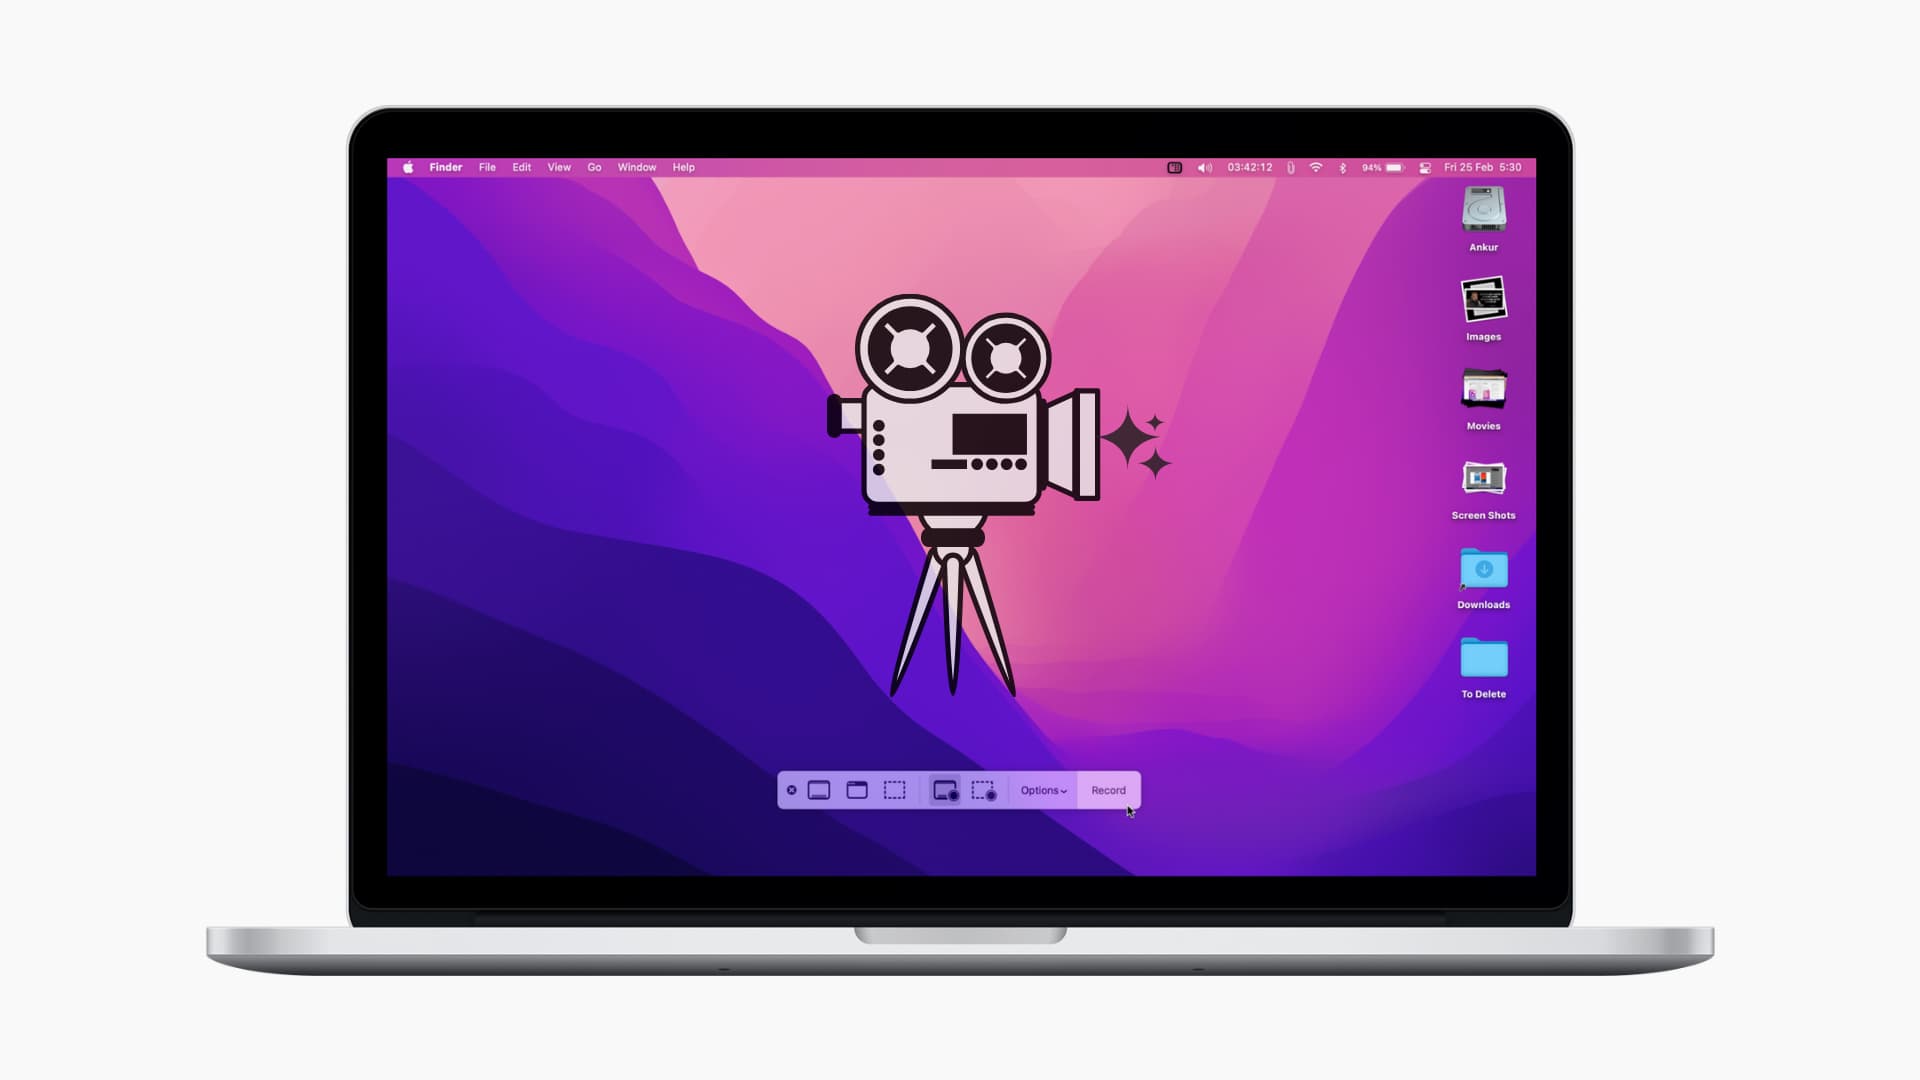 How To Record Videos on Mac: All Methods